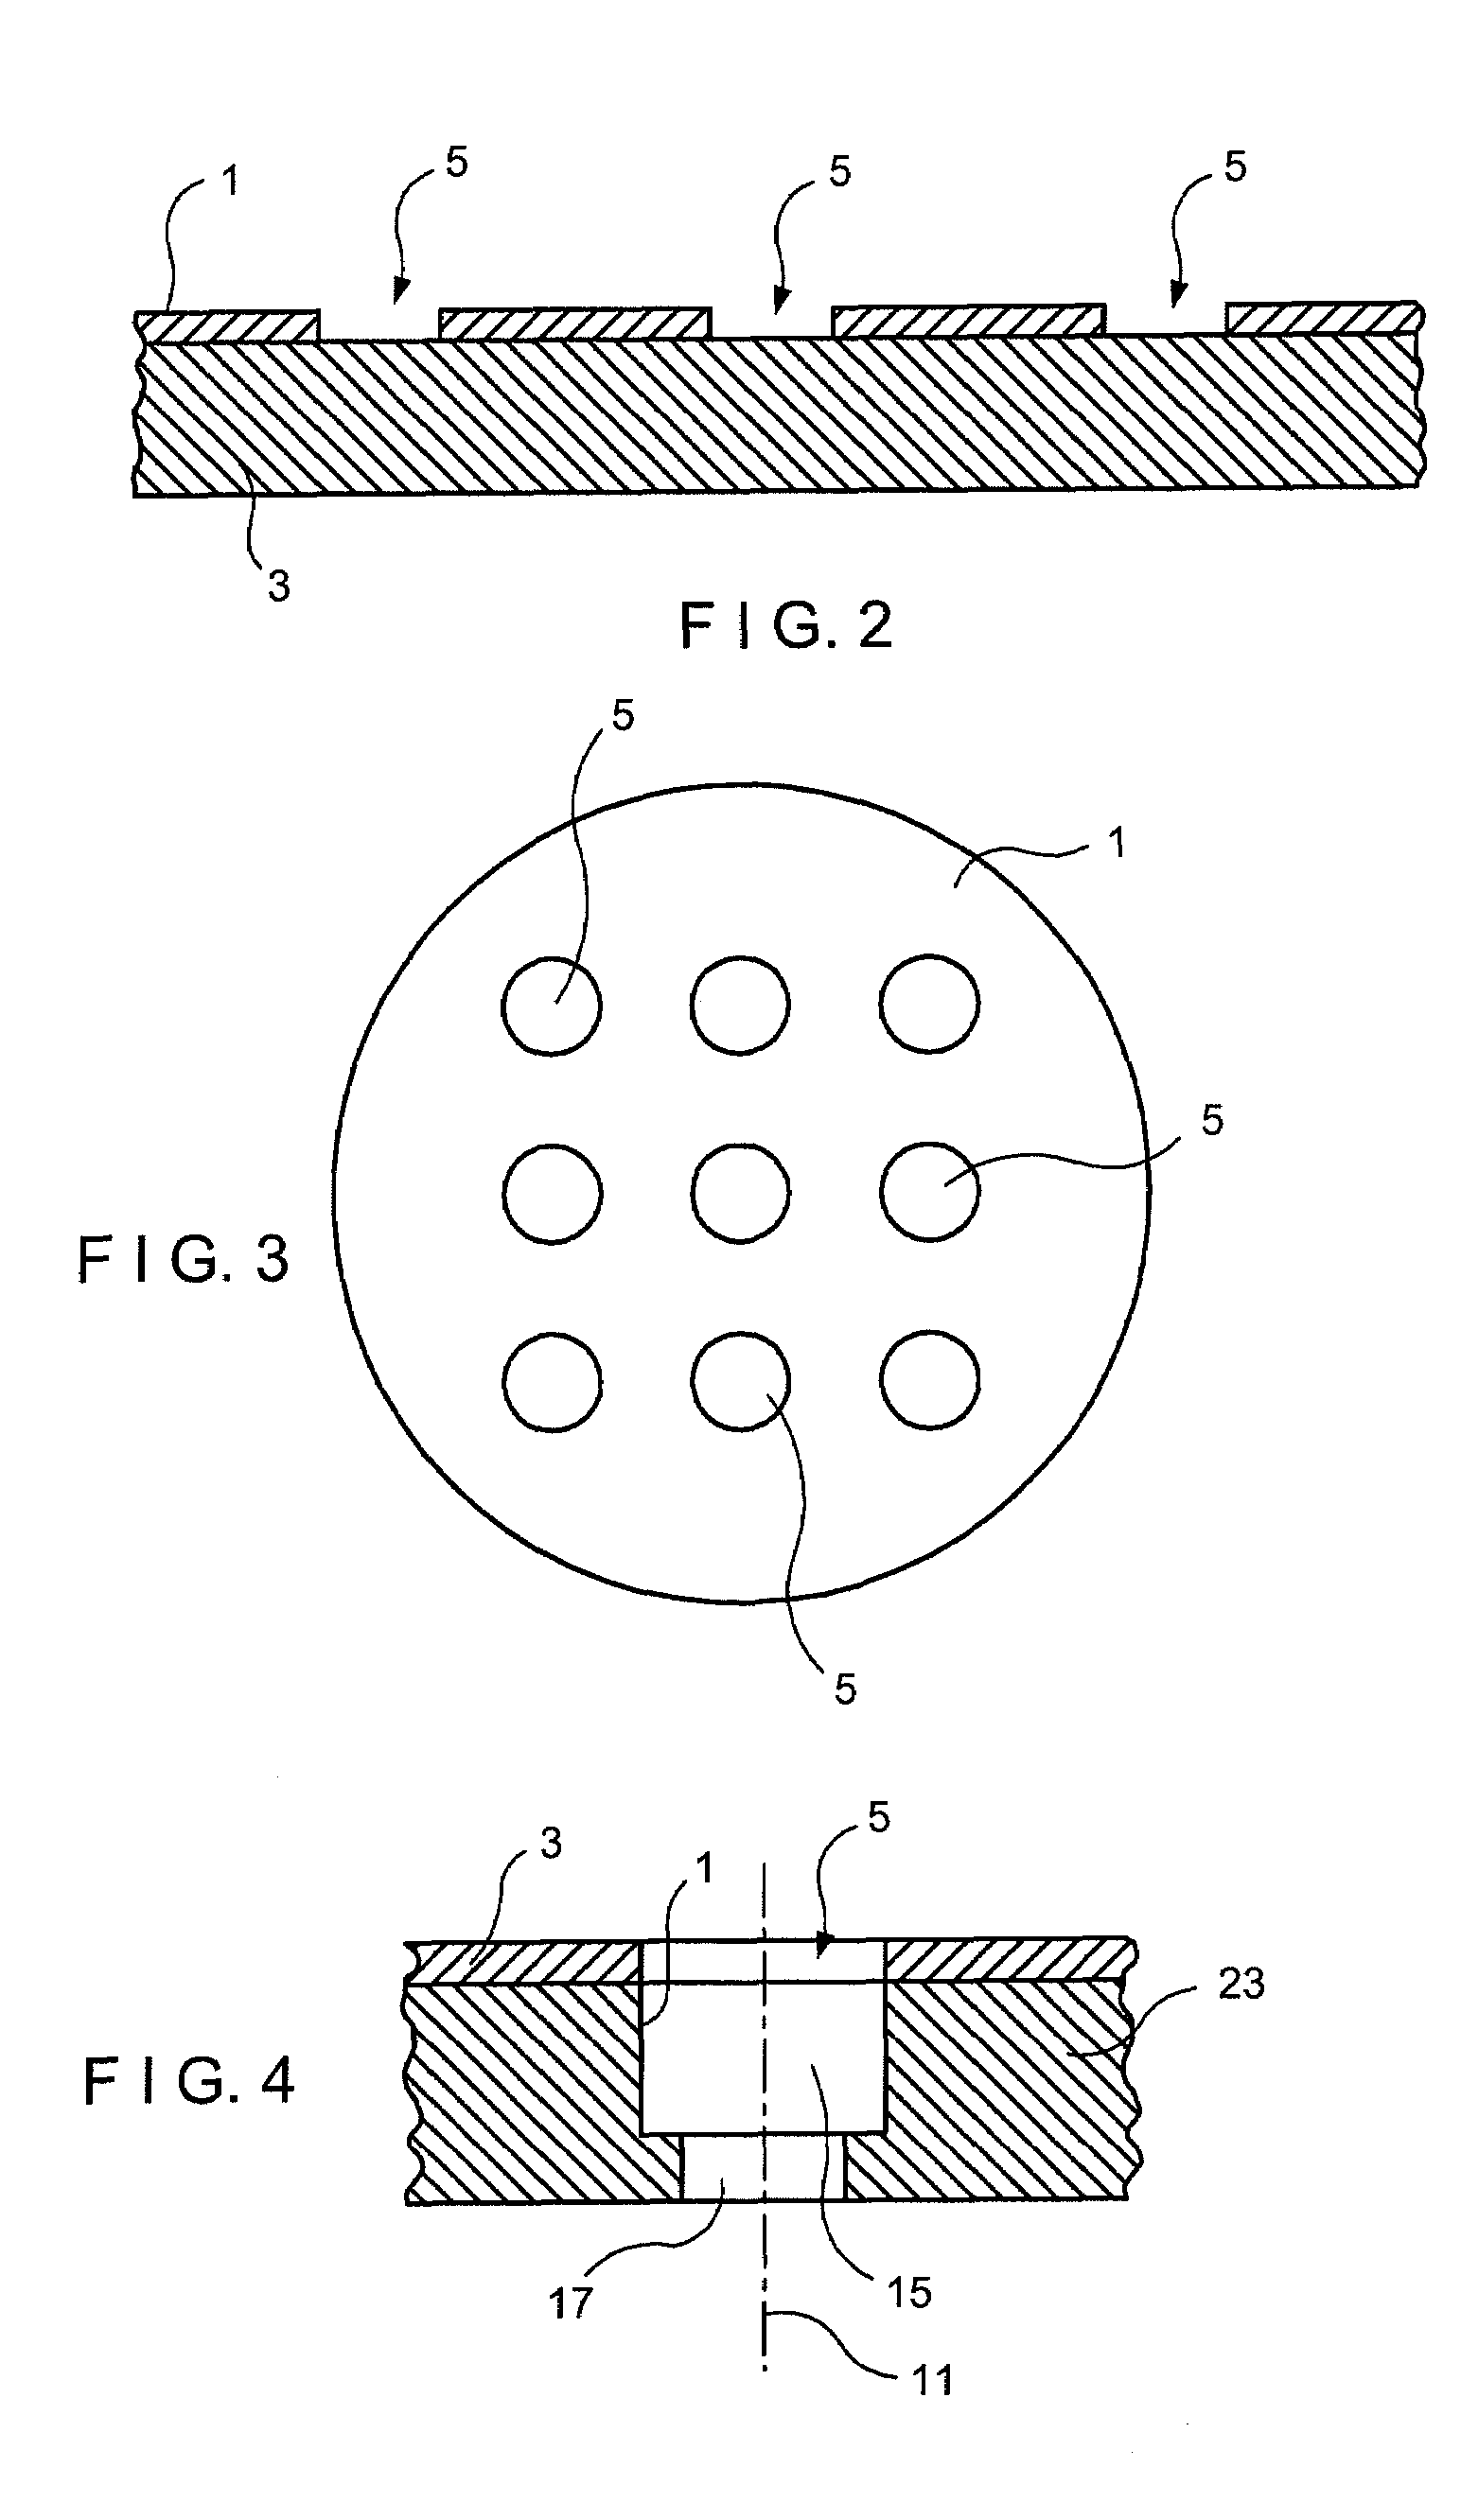 Method of producing hard disk drives of reduced size